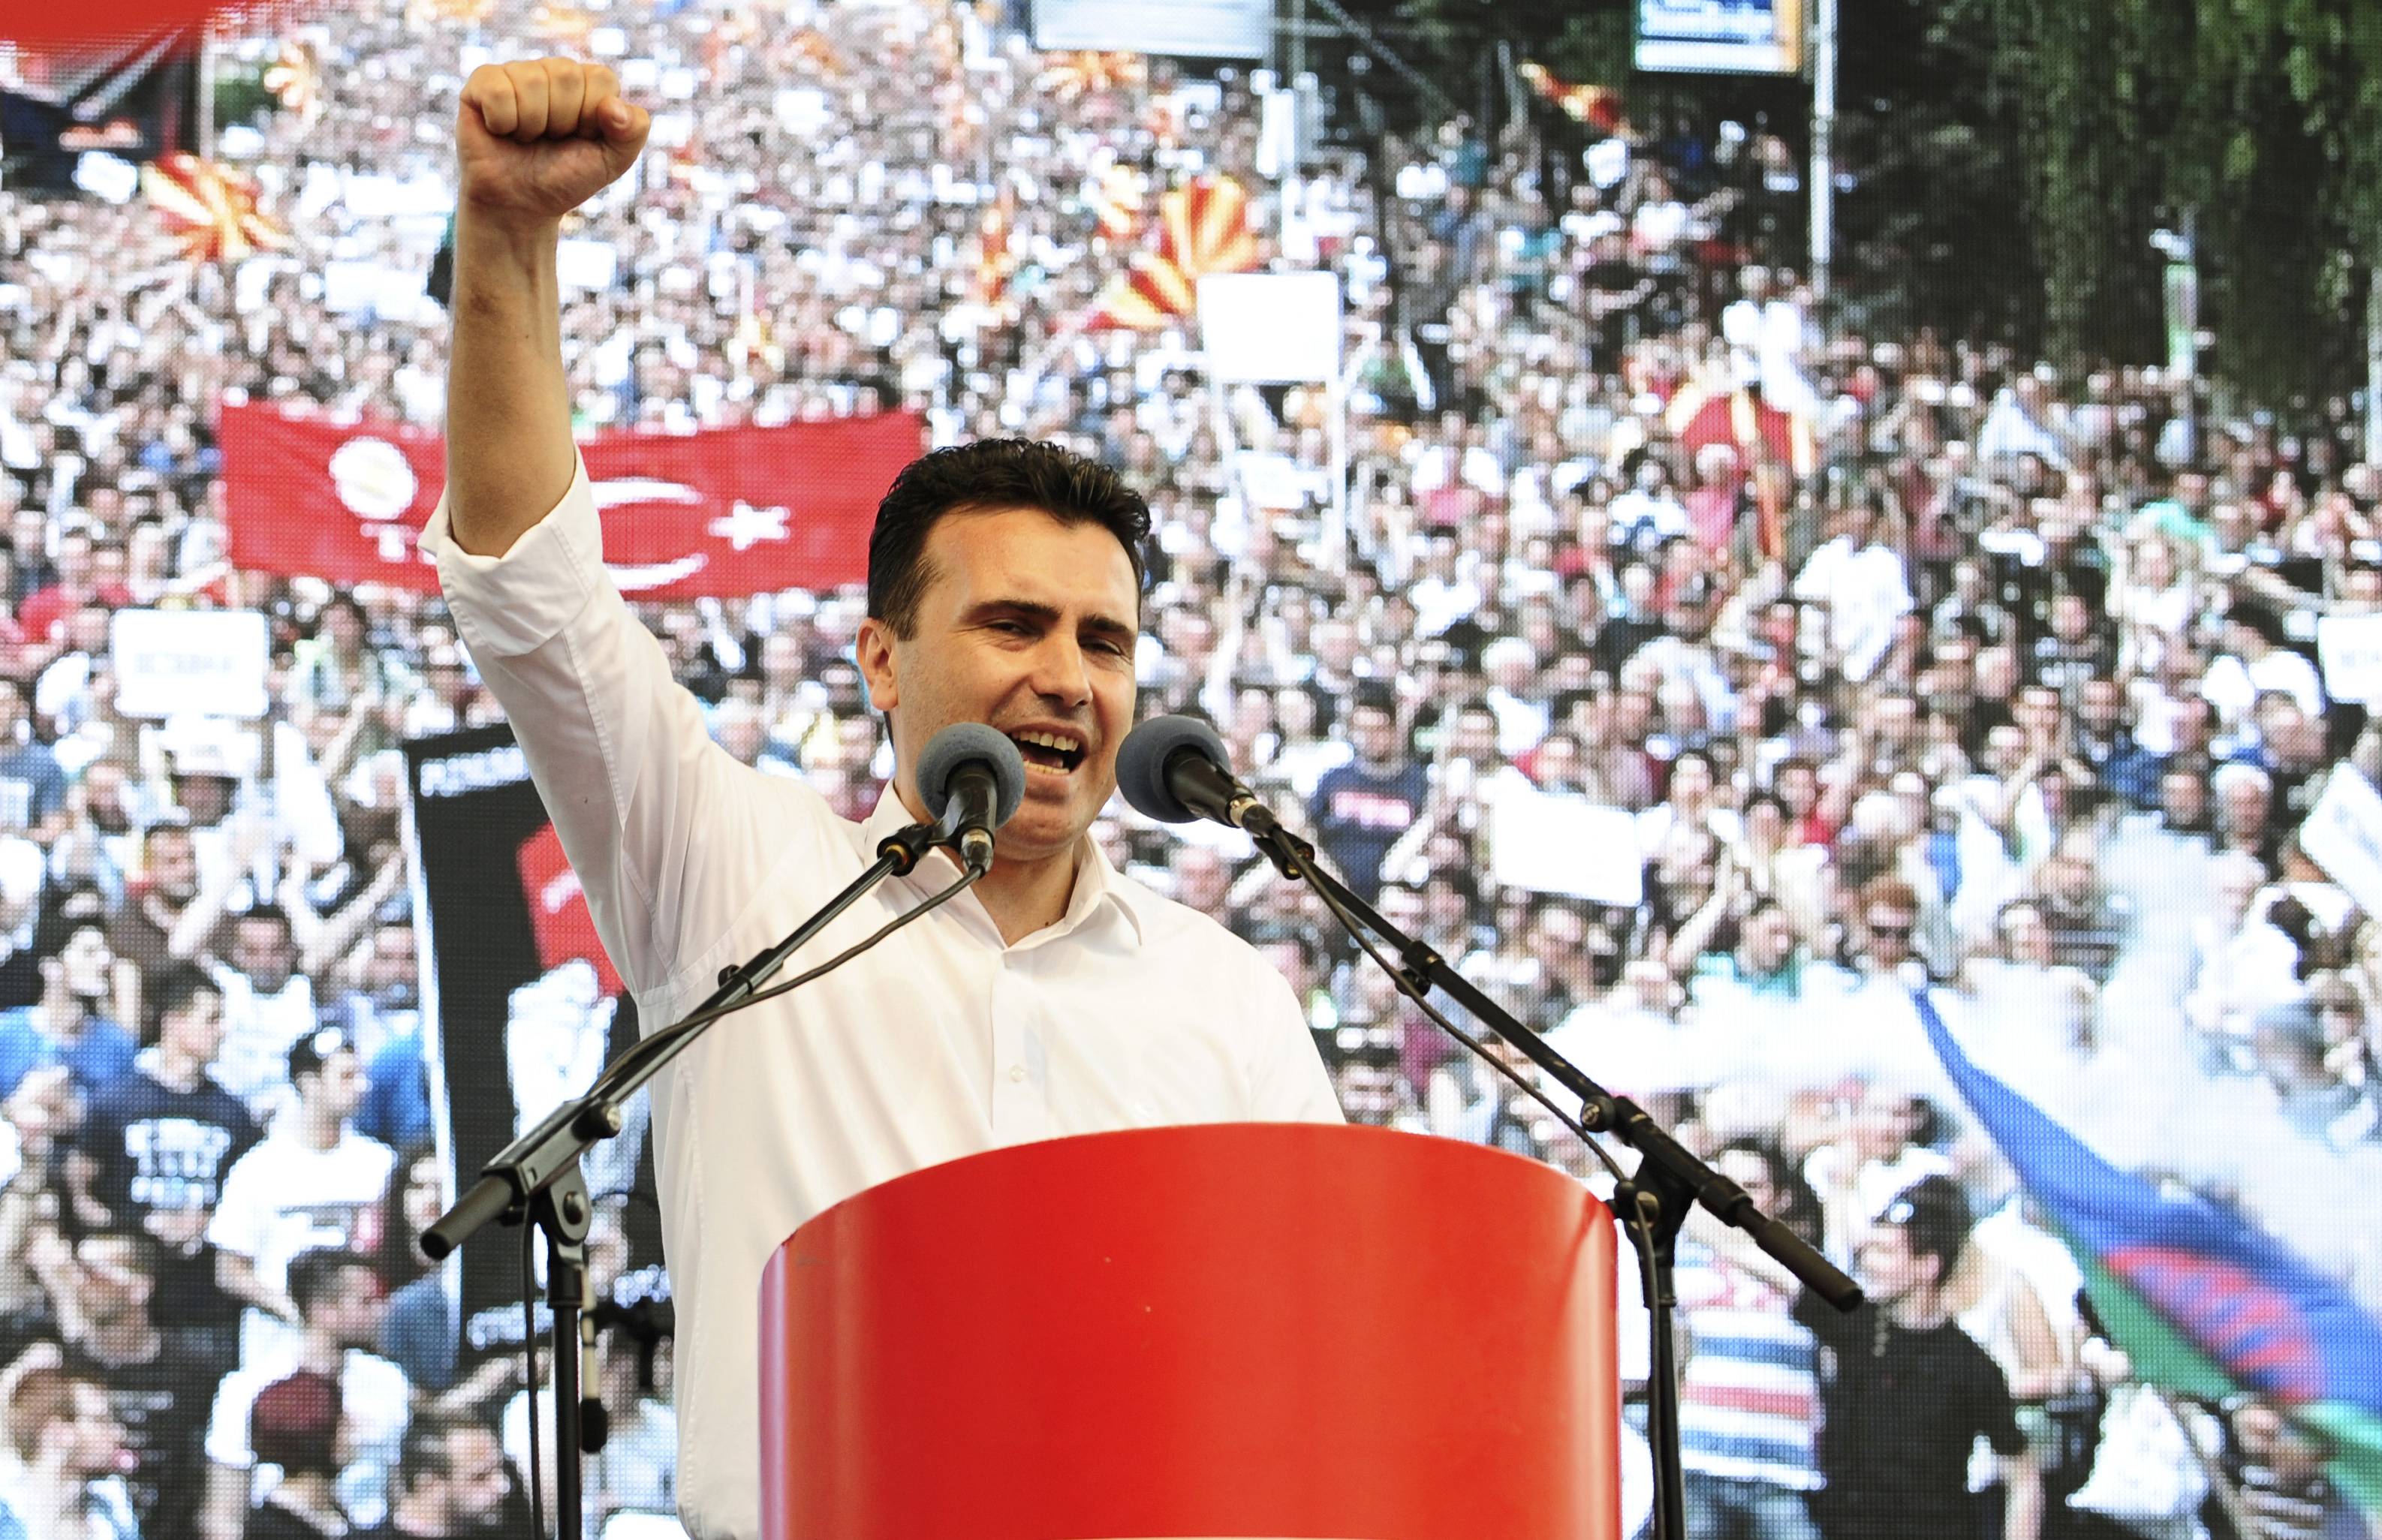 Opposition Social Democrat leader Zoran Zaev delivers a speech in front of a video screen during an anti-government demonstration in Skopje, Macedonia, May 17, 2015. Tens of thousands of protesters took to the streets of Macedonia's capital on Sunday, waving Macedonian and Albanian flags in a dramatic display of ethnic unity against a government on the ropes after months of damaging wire-tap revelations. REUTERS/Ognen Teofilovski